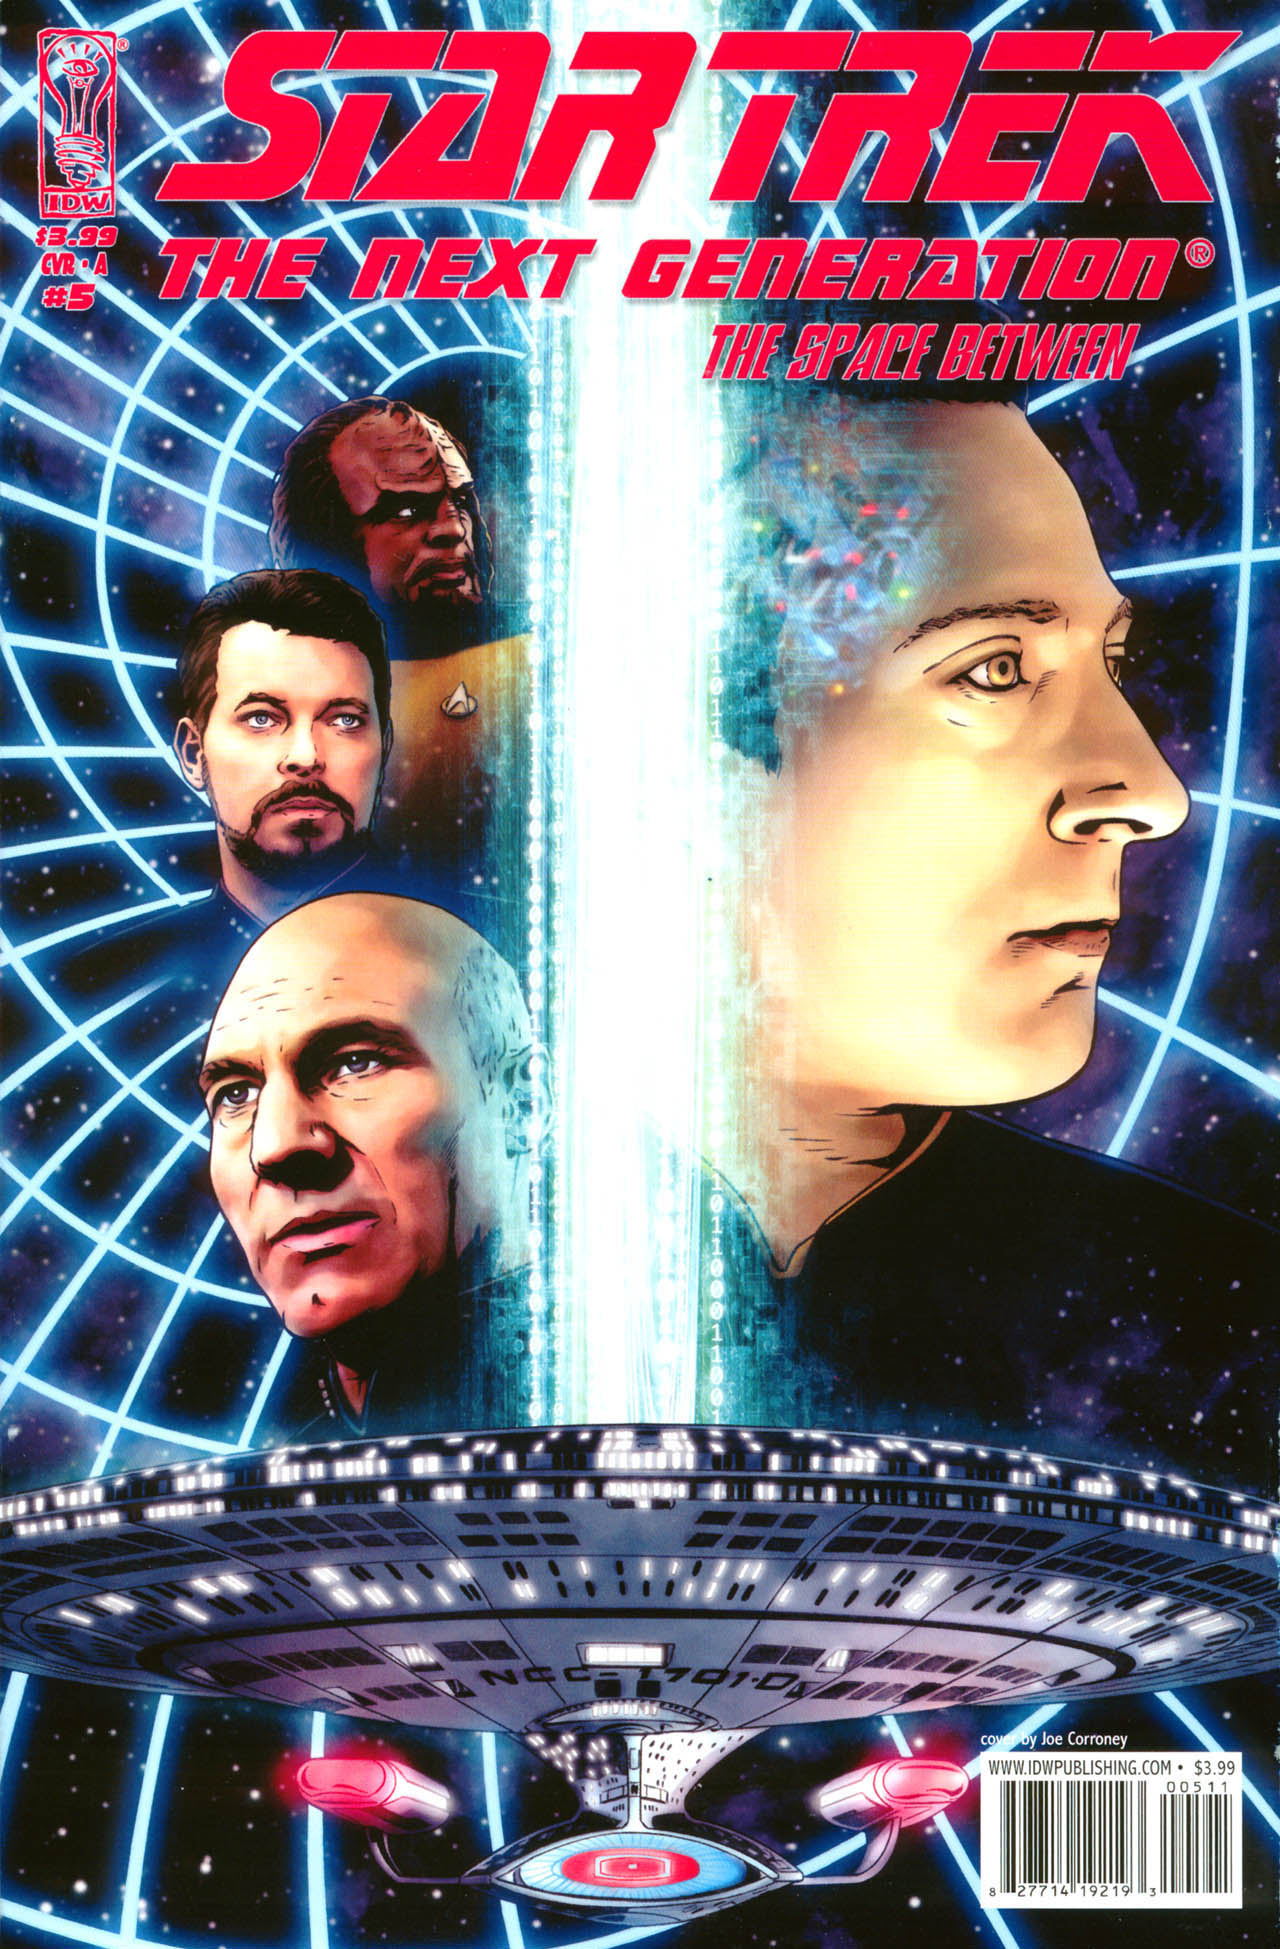 Read online Star Trek: The Next Generation: The Space Between comic -  Issue #5 - 1